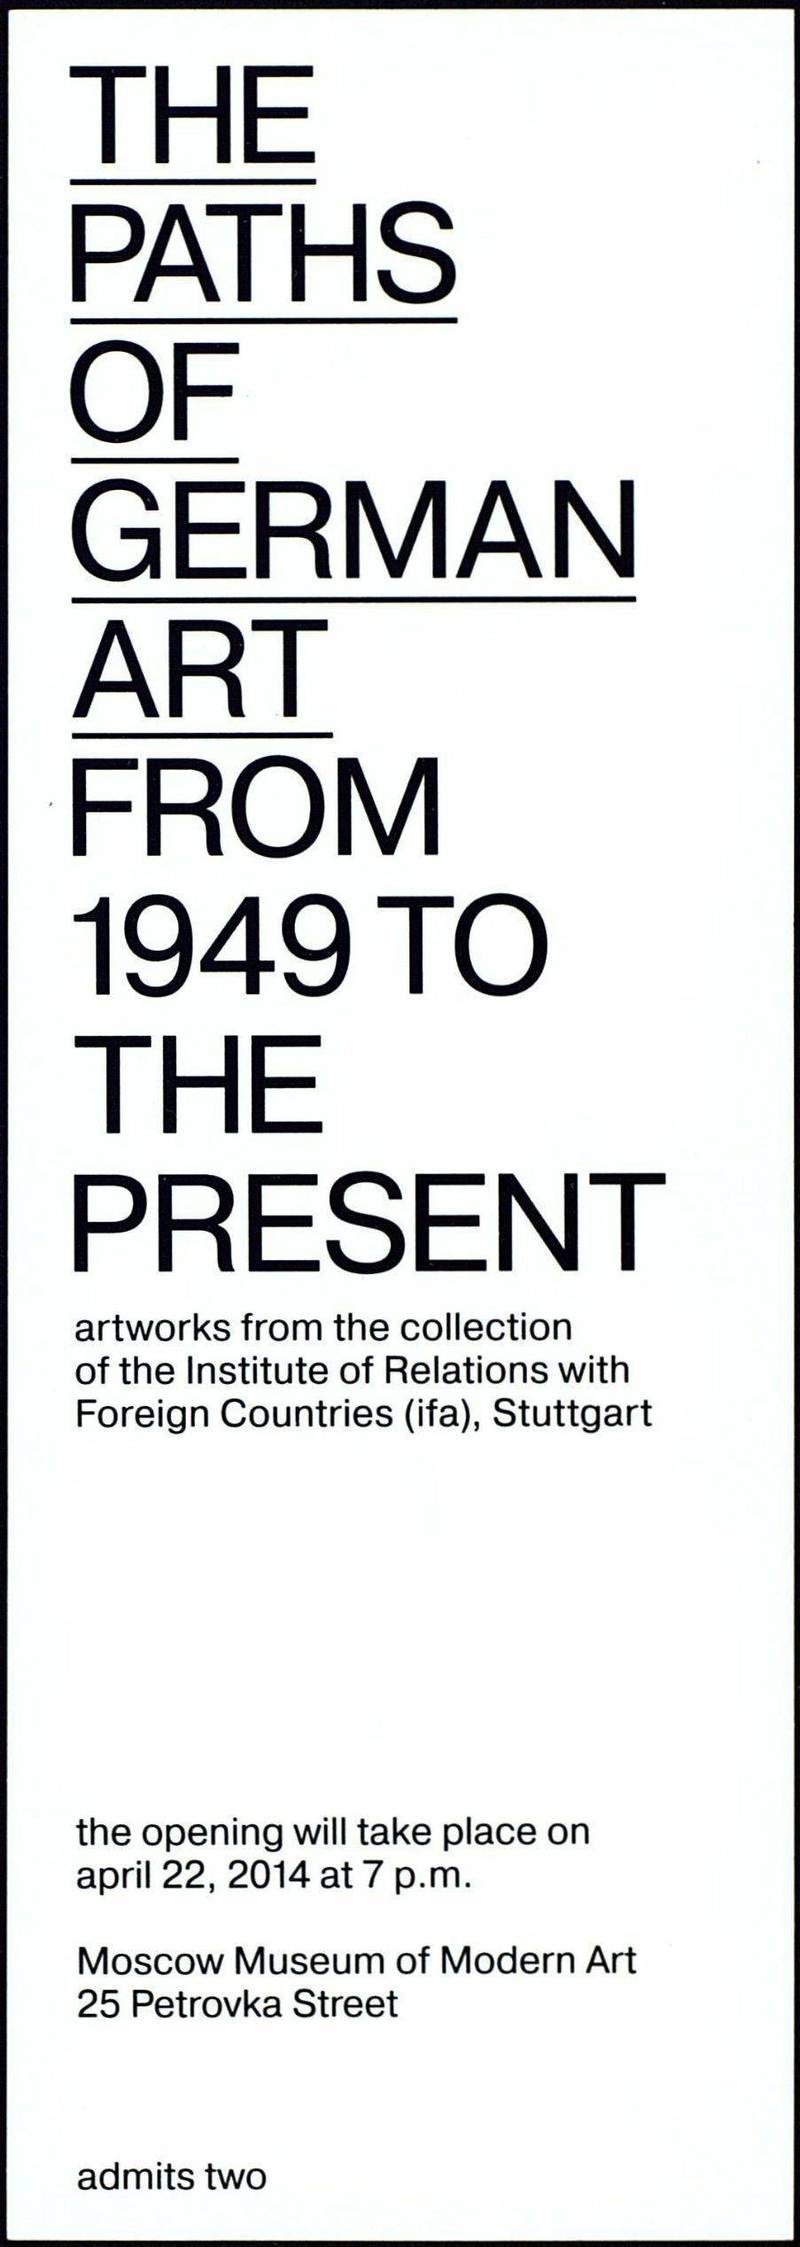 The Paths of German Art from 1949 to the present